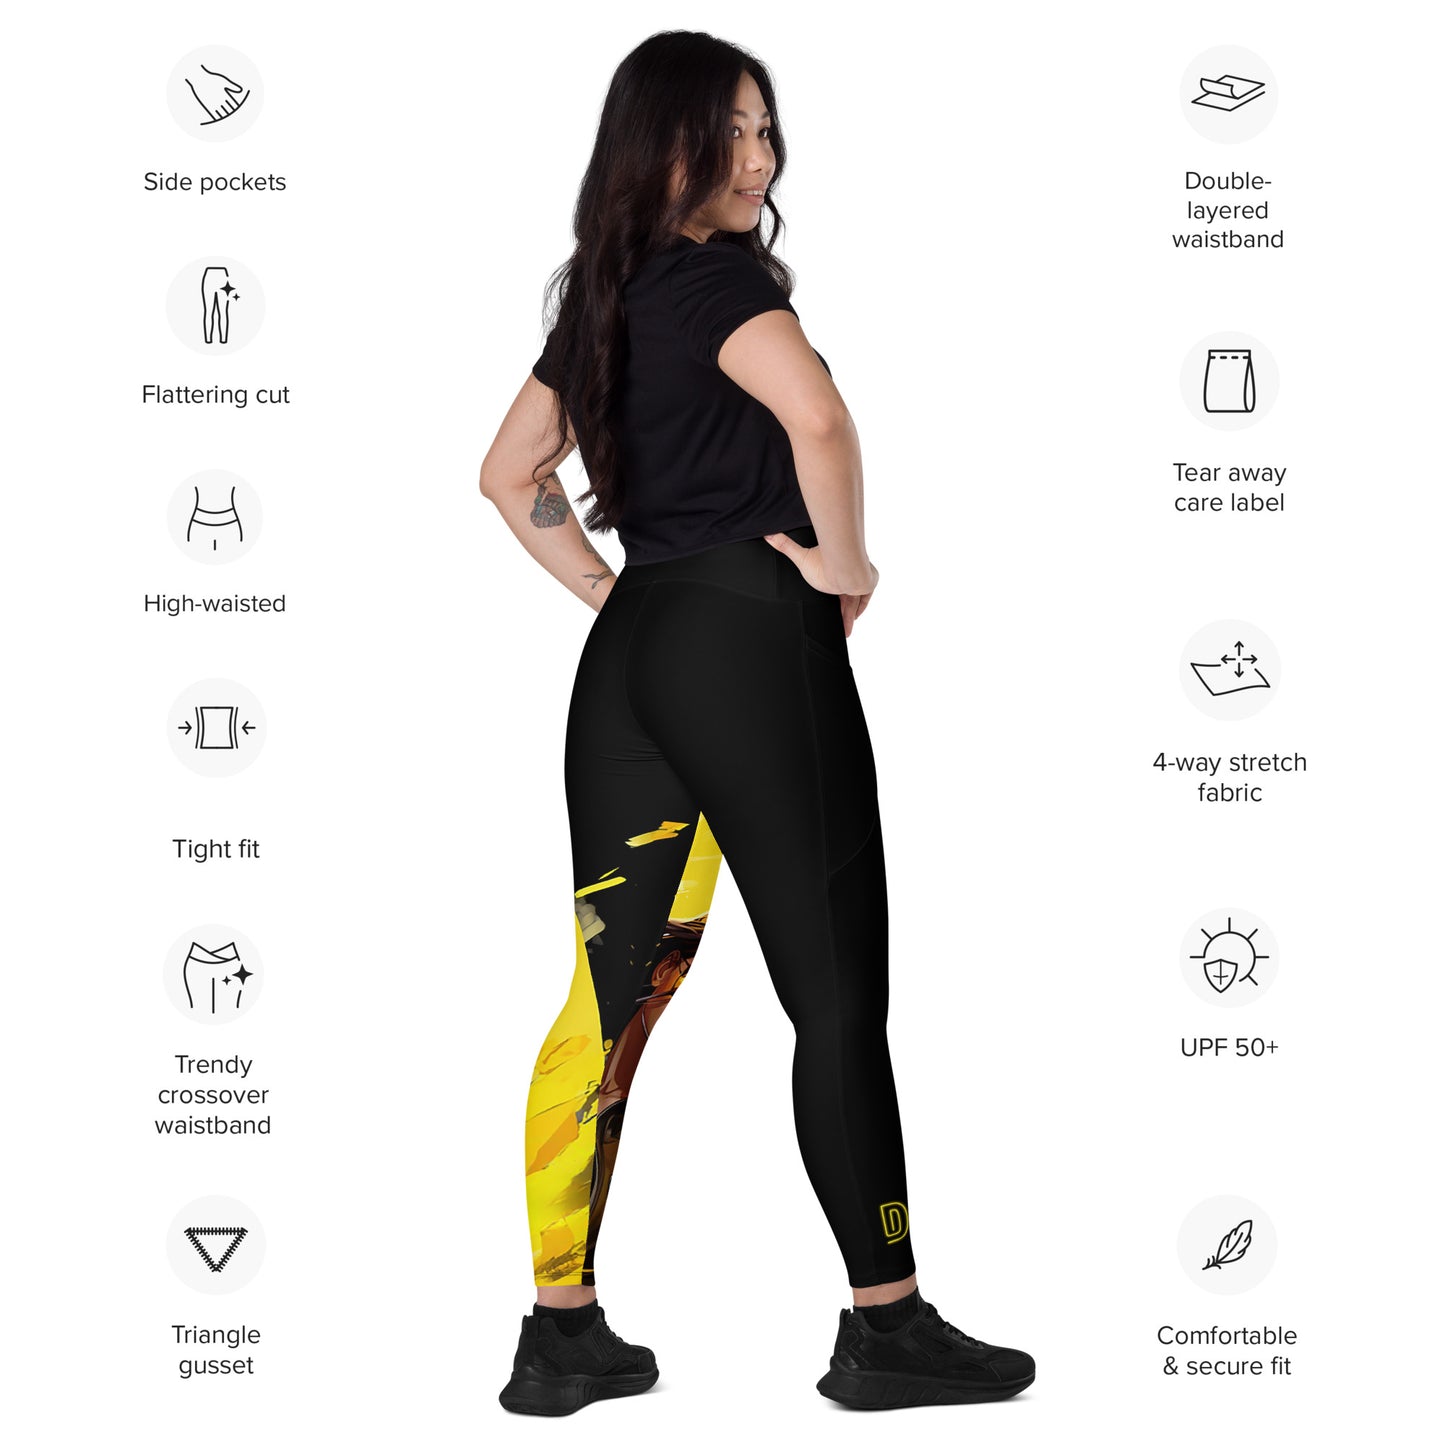 DIN Unruly - Crossover leggings with pockets